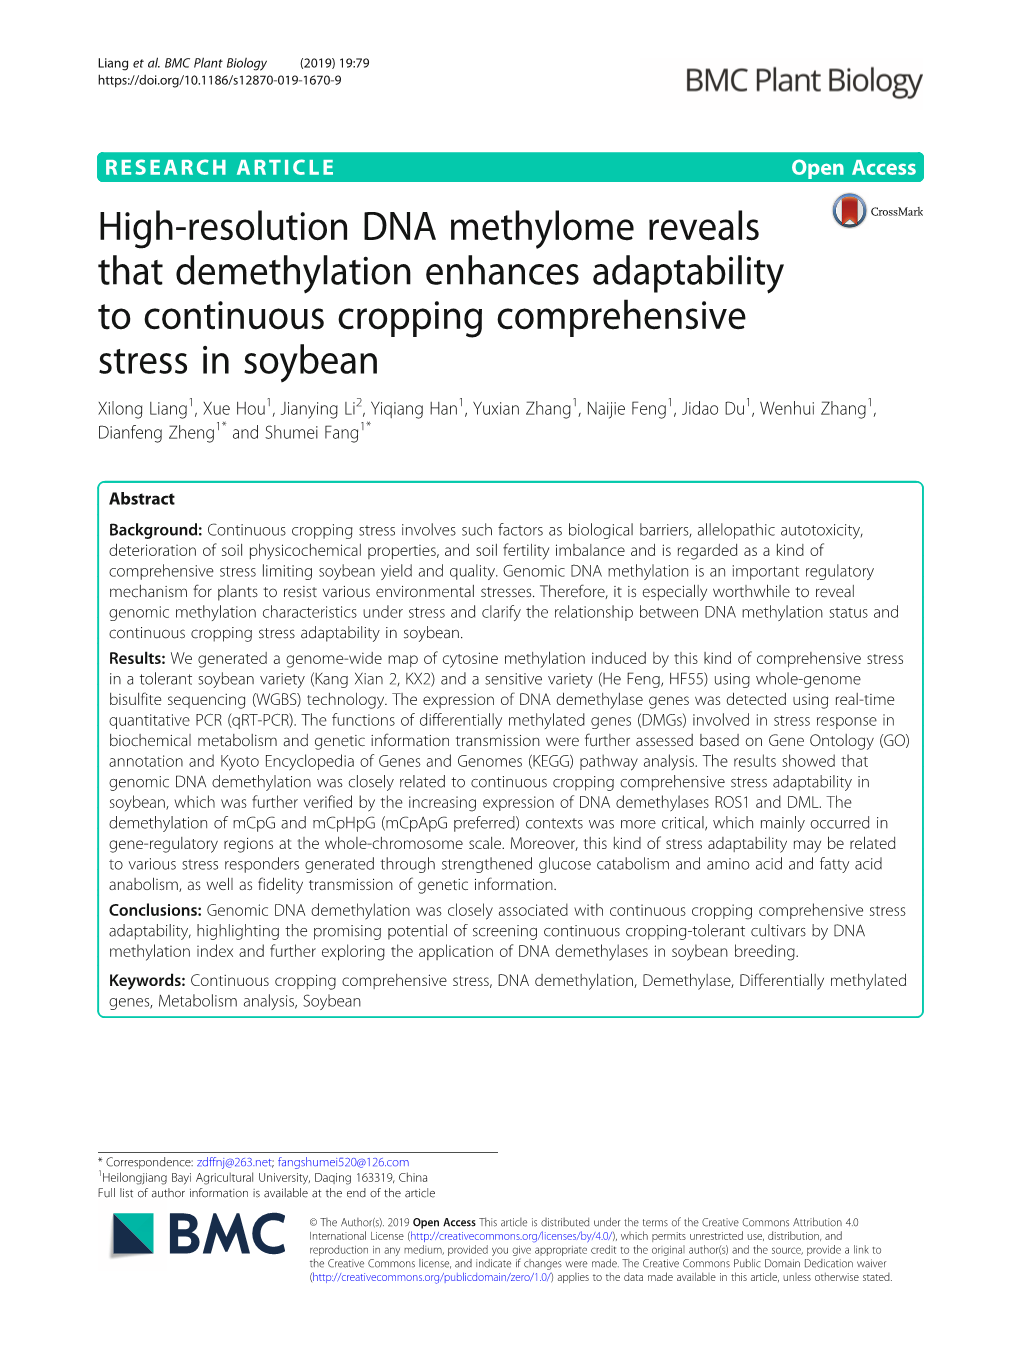 High-Resolution DNA Methylome Reveals That